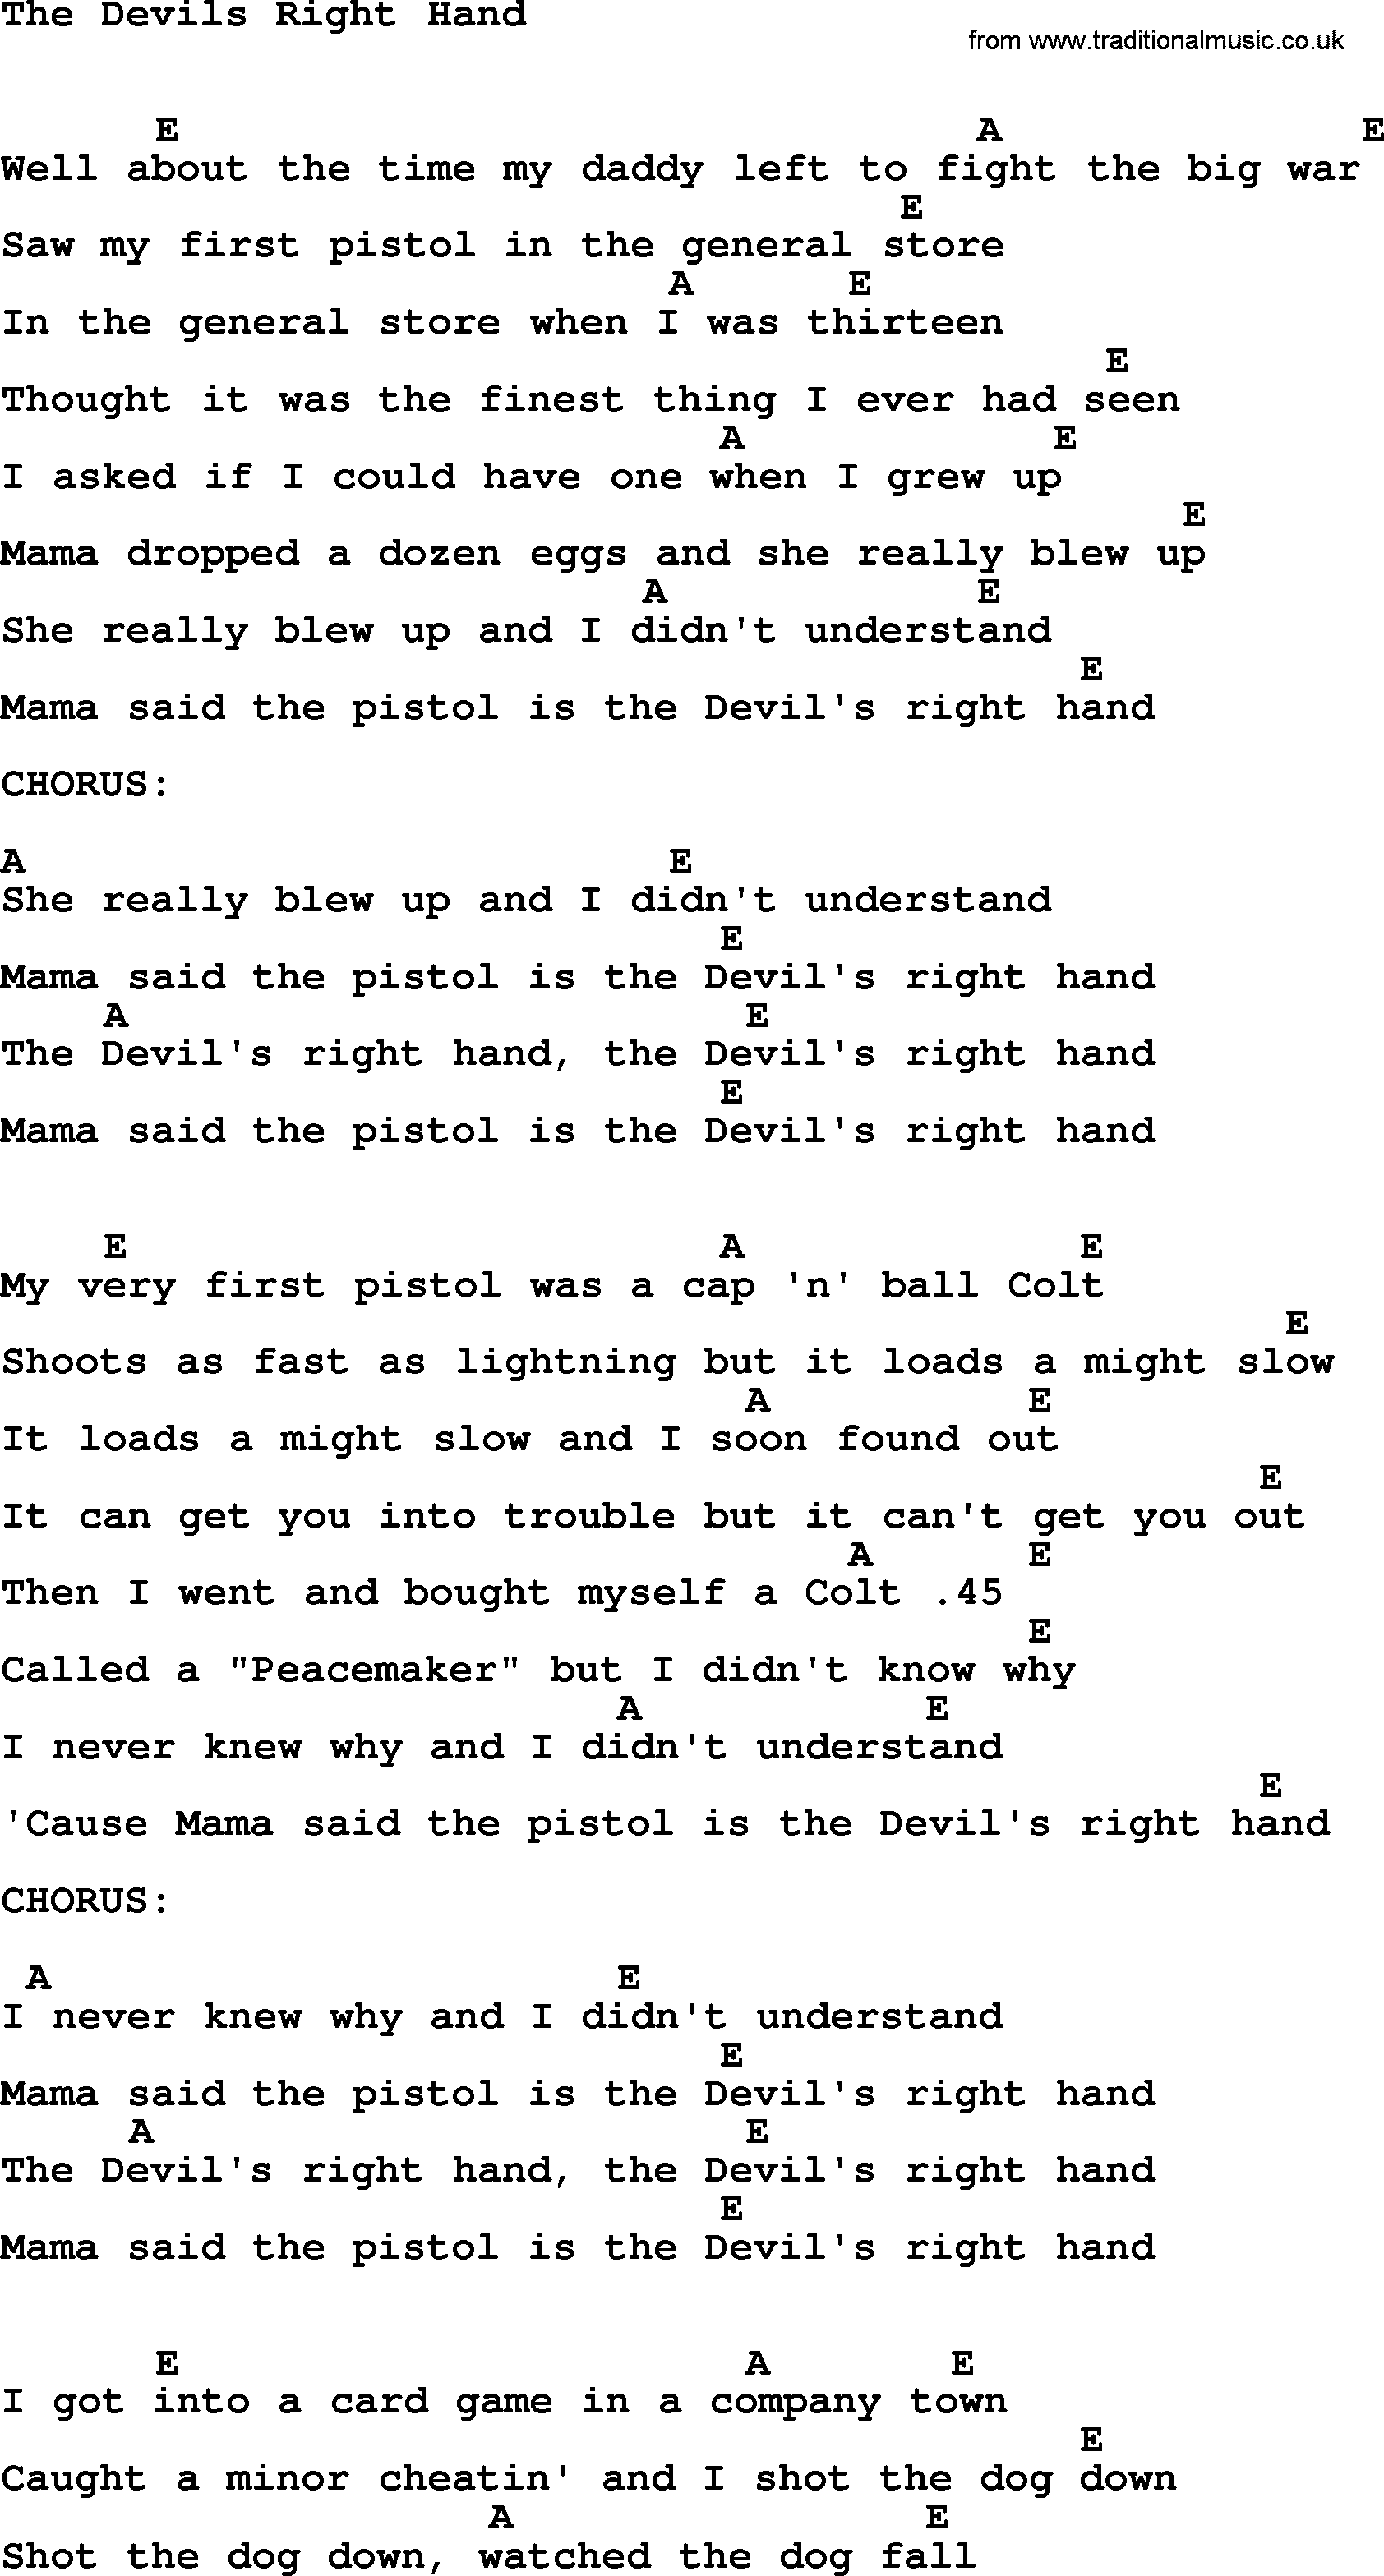 Johnny Cash song The Devils Right Hand, lyrics and chords